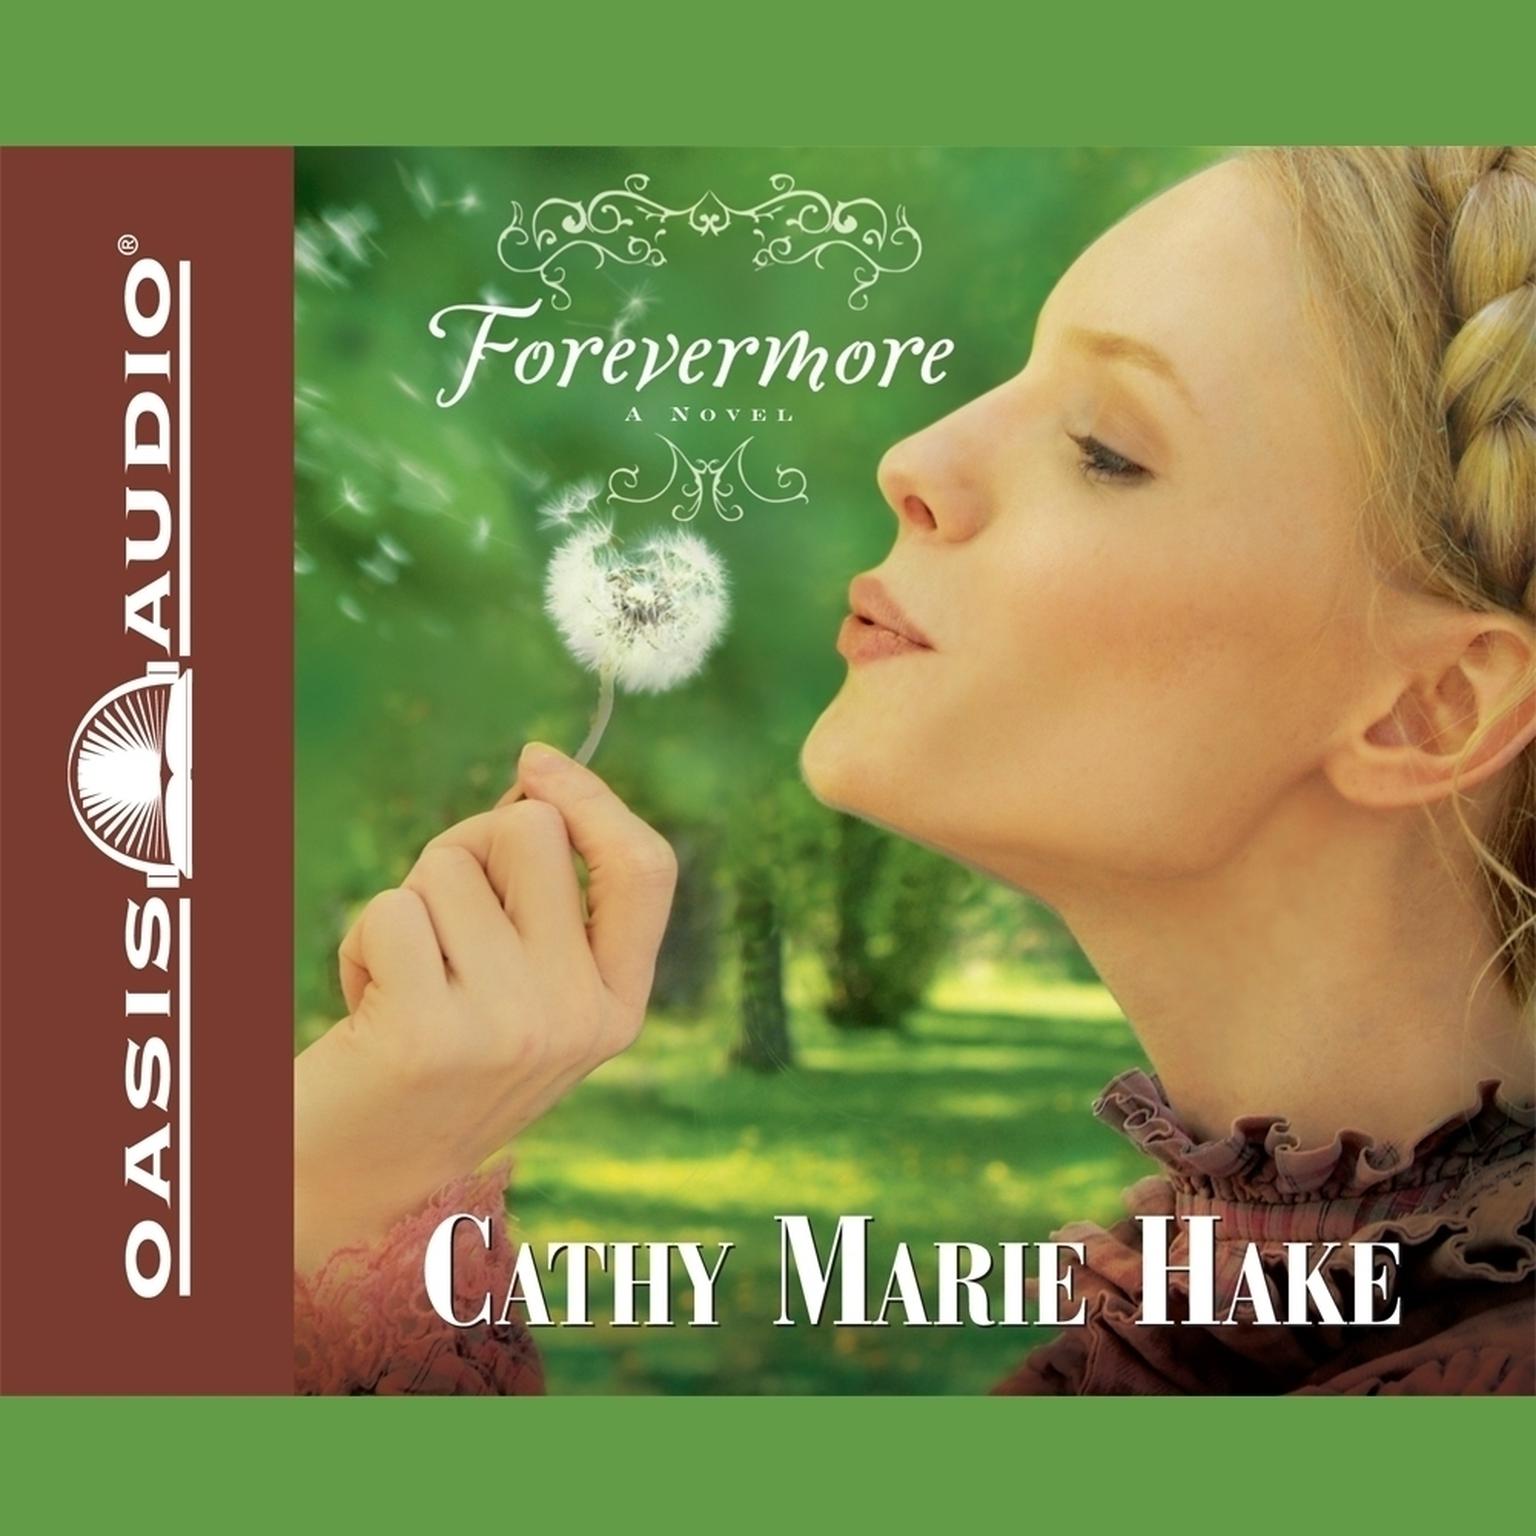 Forevermore (Abridged) Audiobook, by Cathy Marie Hake